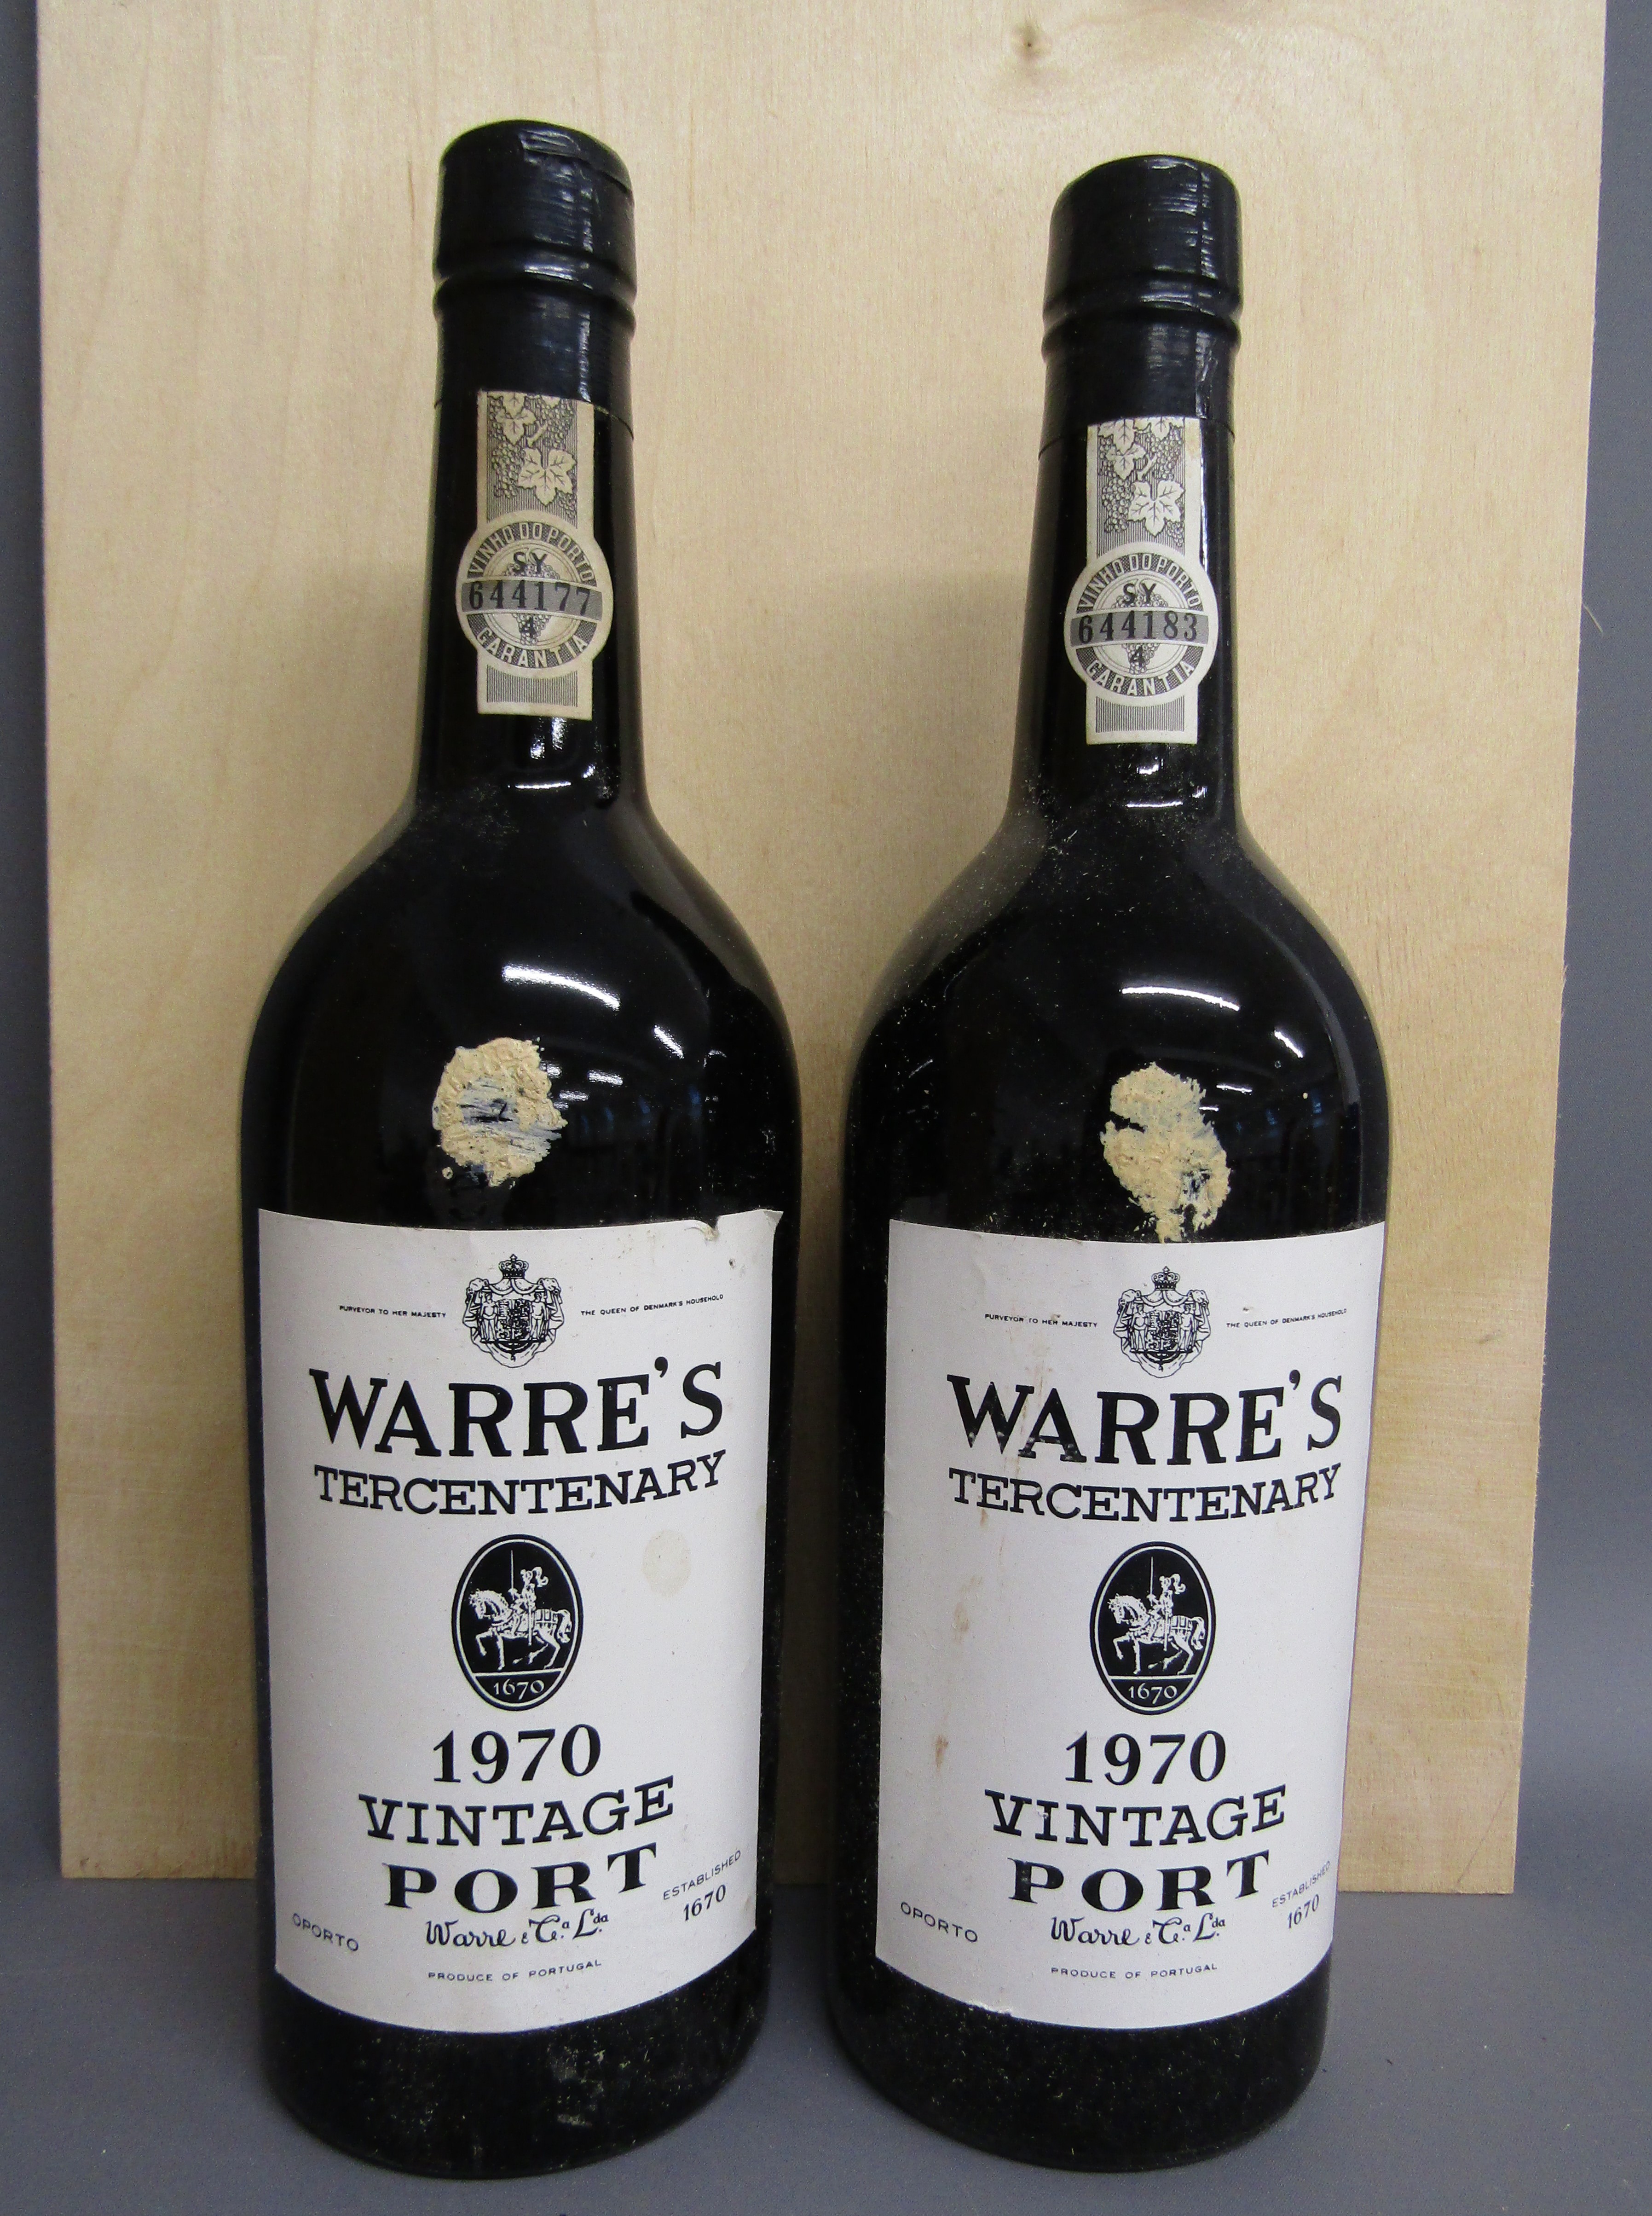 2 bottles of Warre's 1970 Tercentenary vintage Port still with wax seals intact and wooden crate - Image 2 of 6